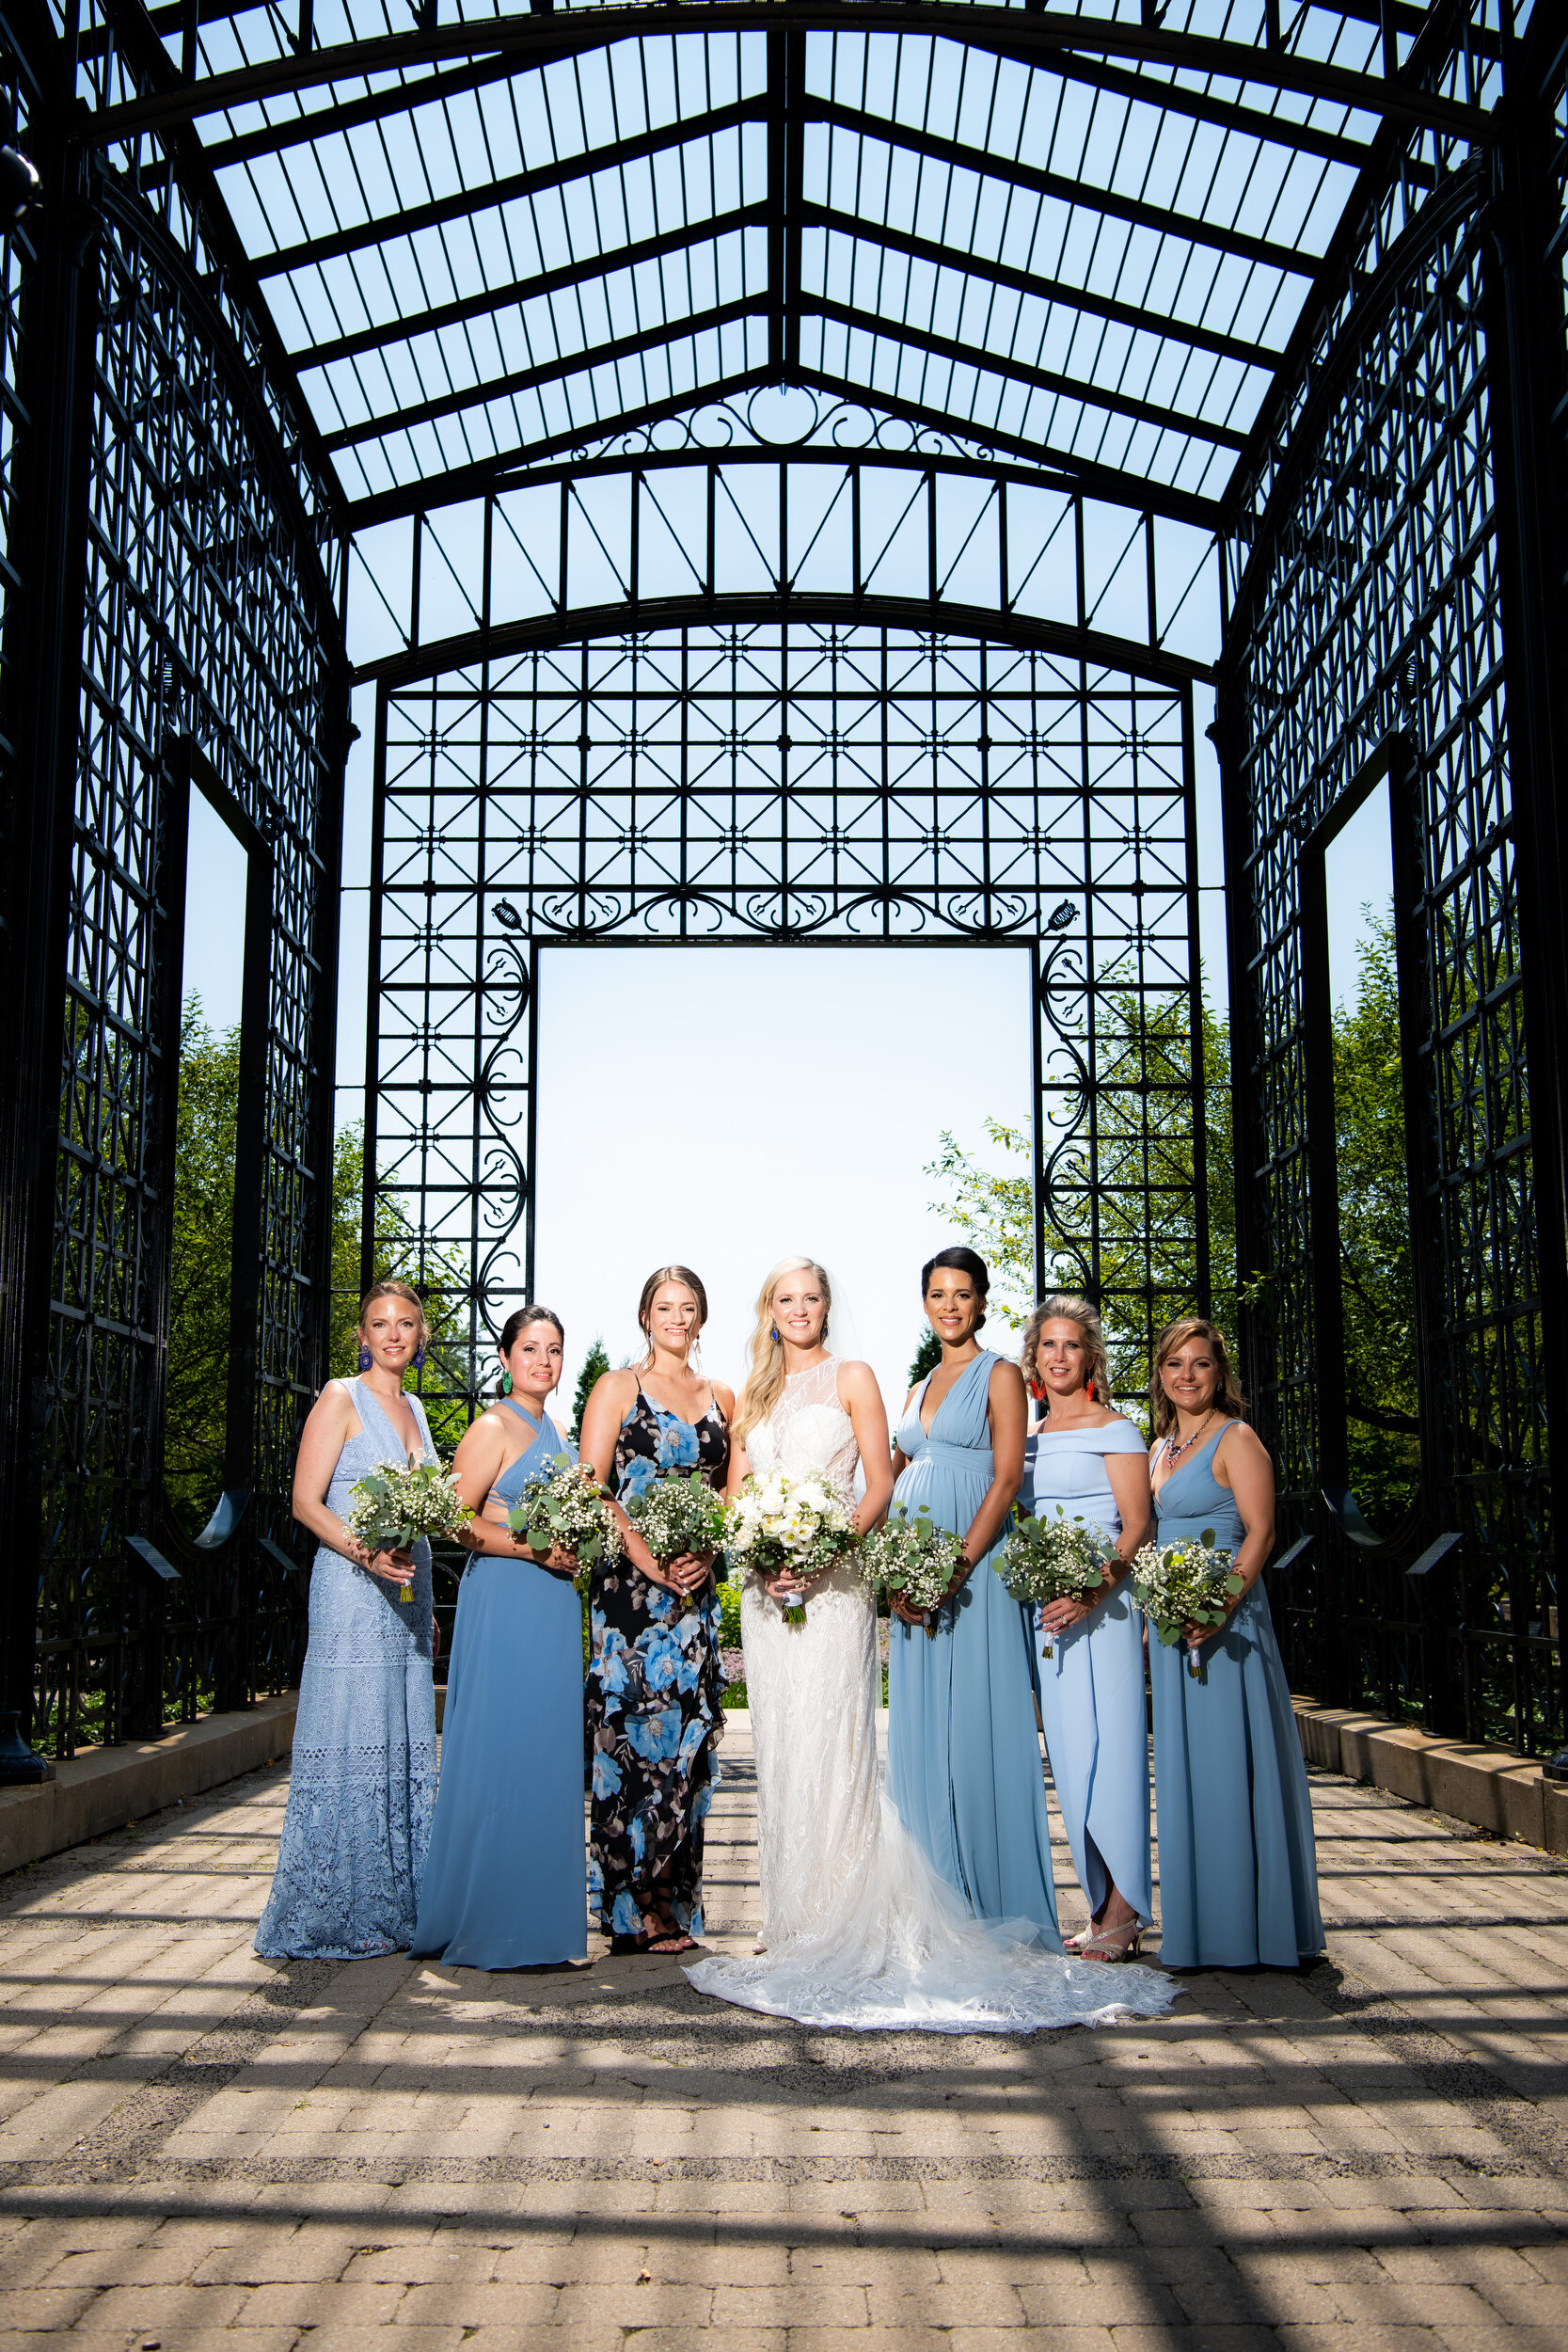 Wedding party portrait: Carnivale Chicago Wedding captured by J. Brown Photography